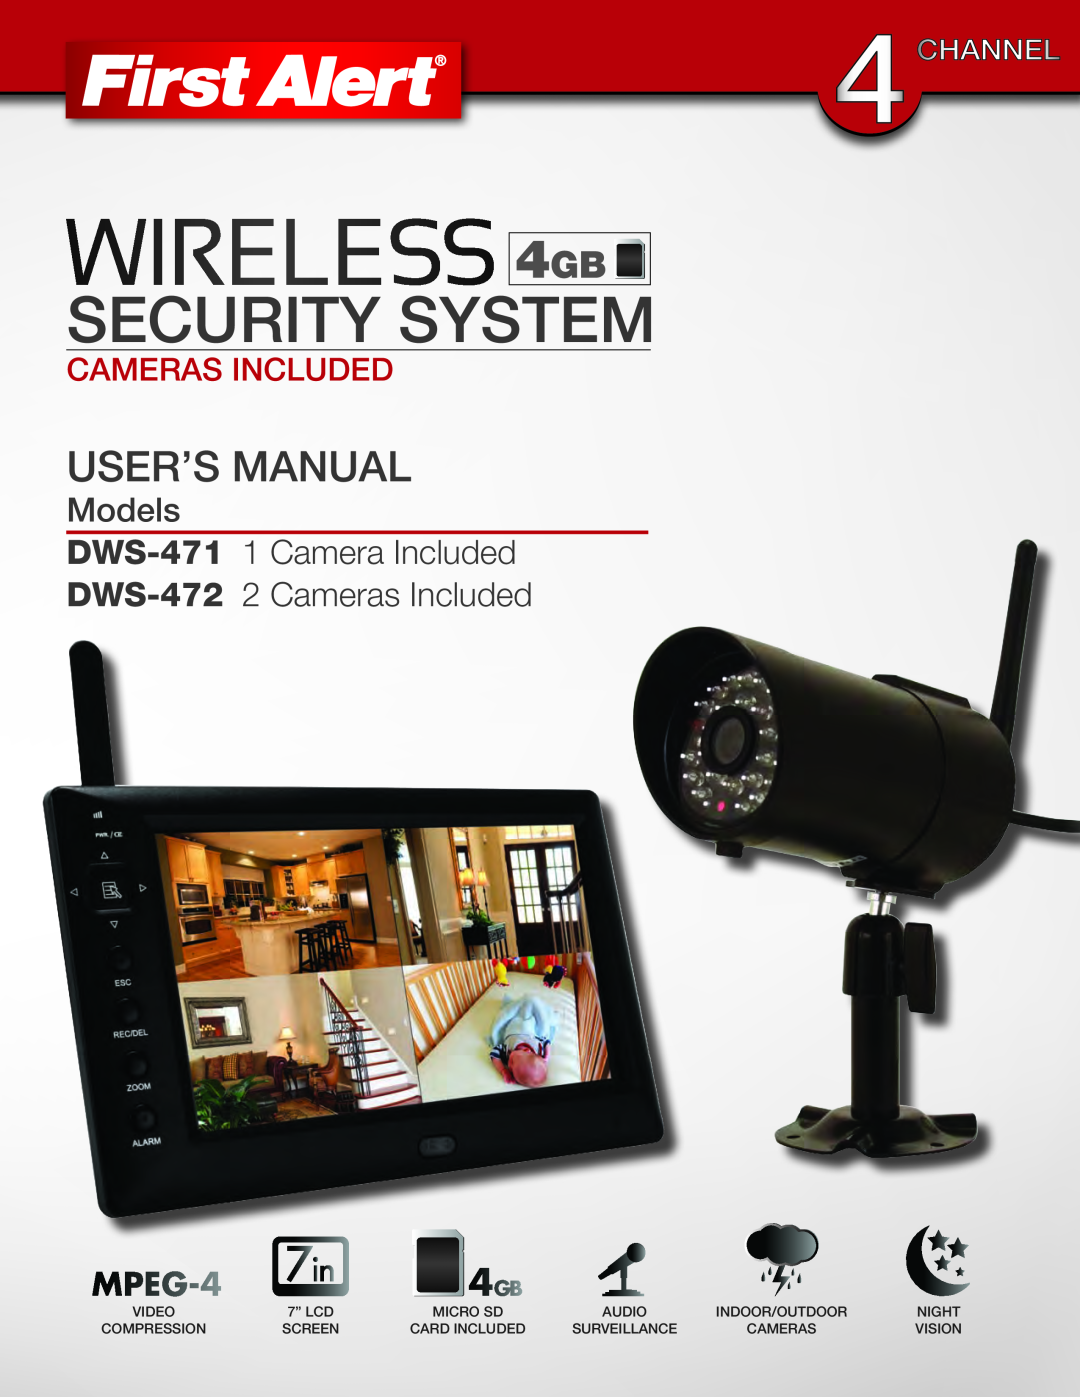 First Alert user manual Security System, Models DWS-471 1 Camera Included, DWS-472 2 Cameras Included, MPEG-4 4GB 